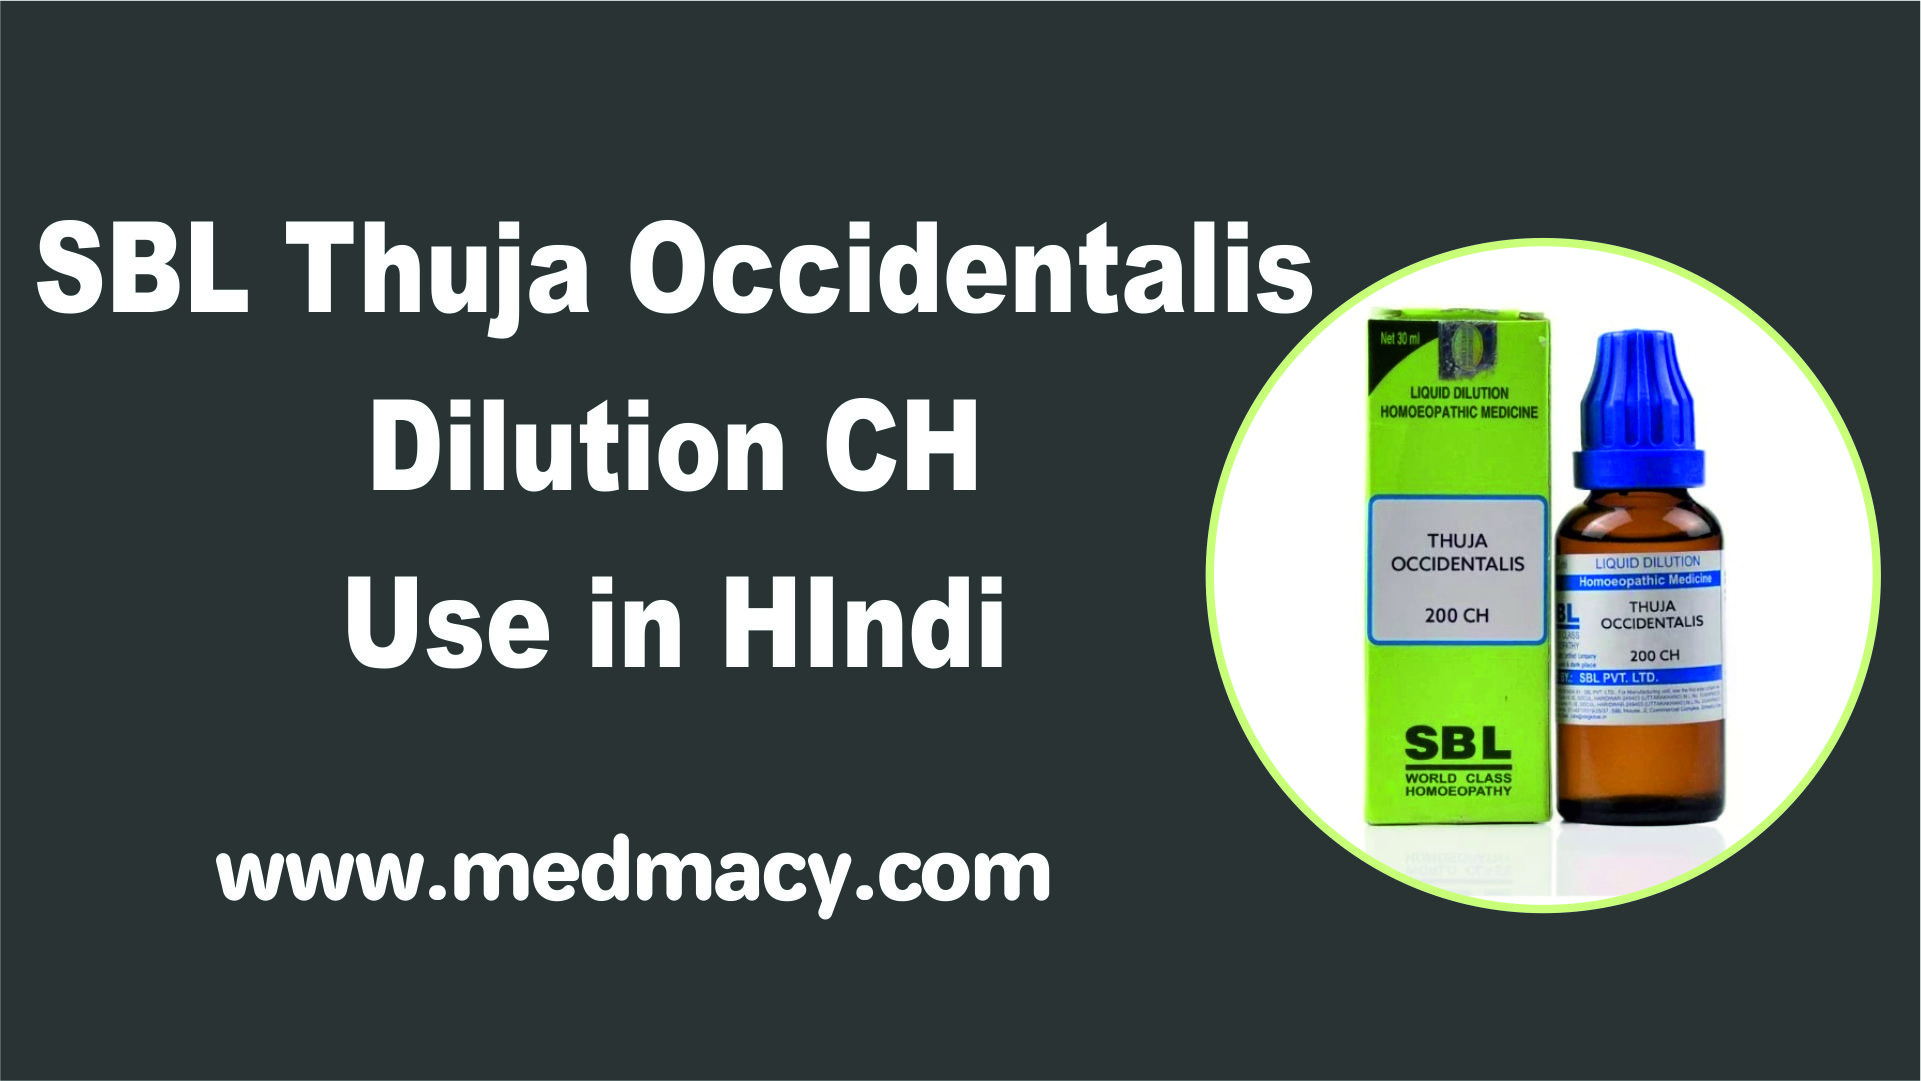 SBL Thuja occidentalis Dilution 200 CH uses in hindi